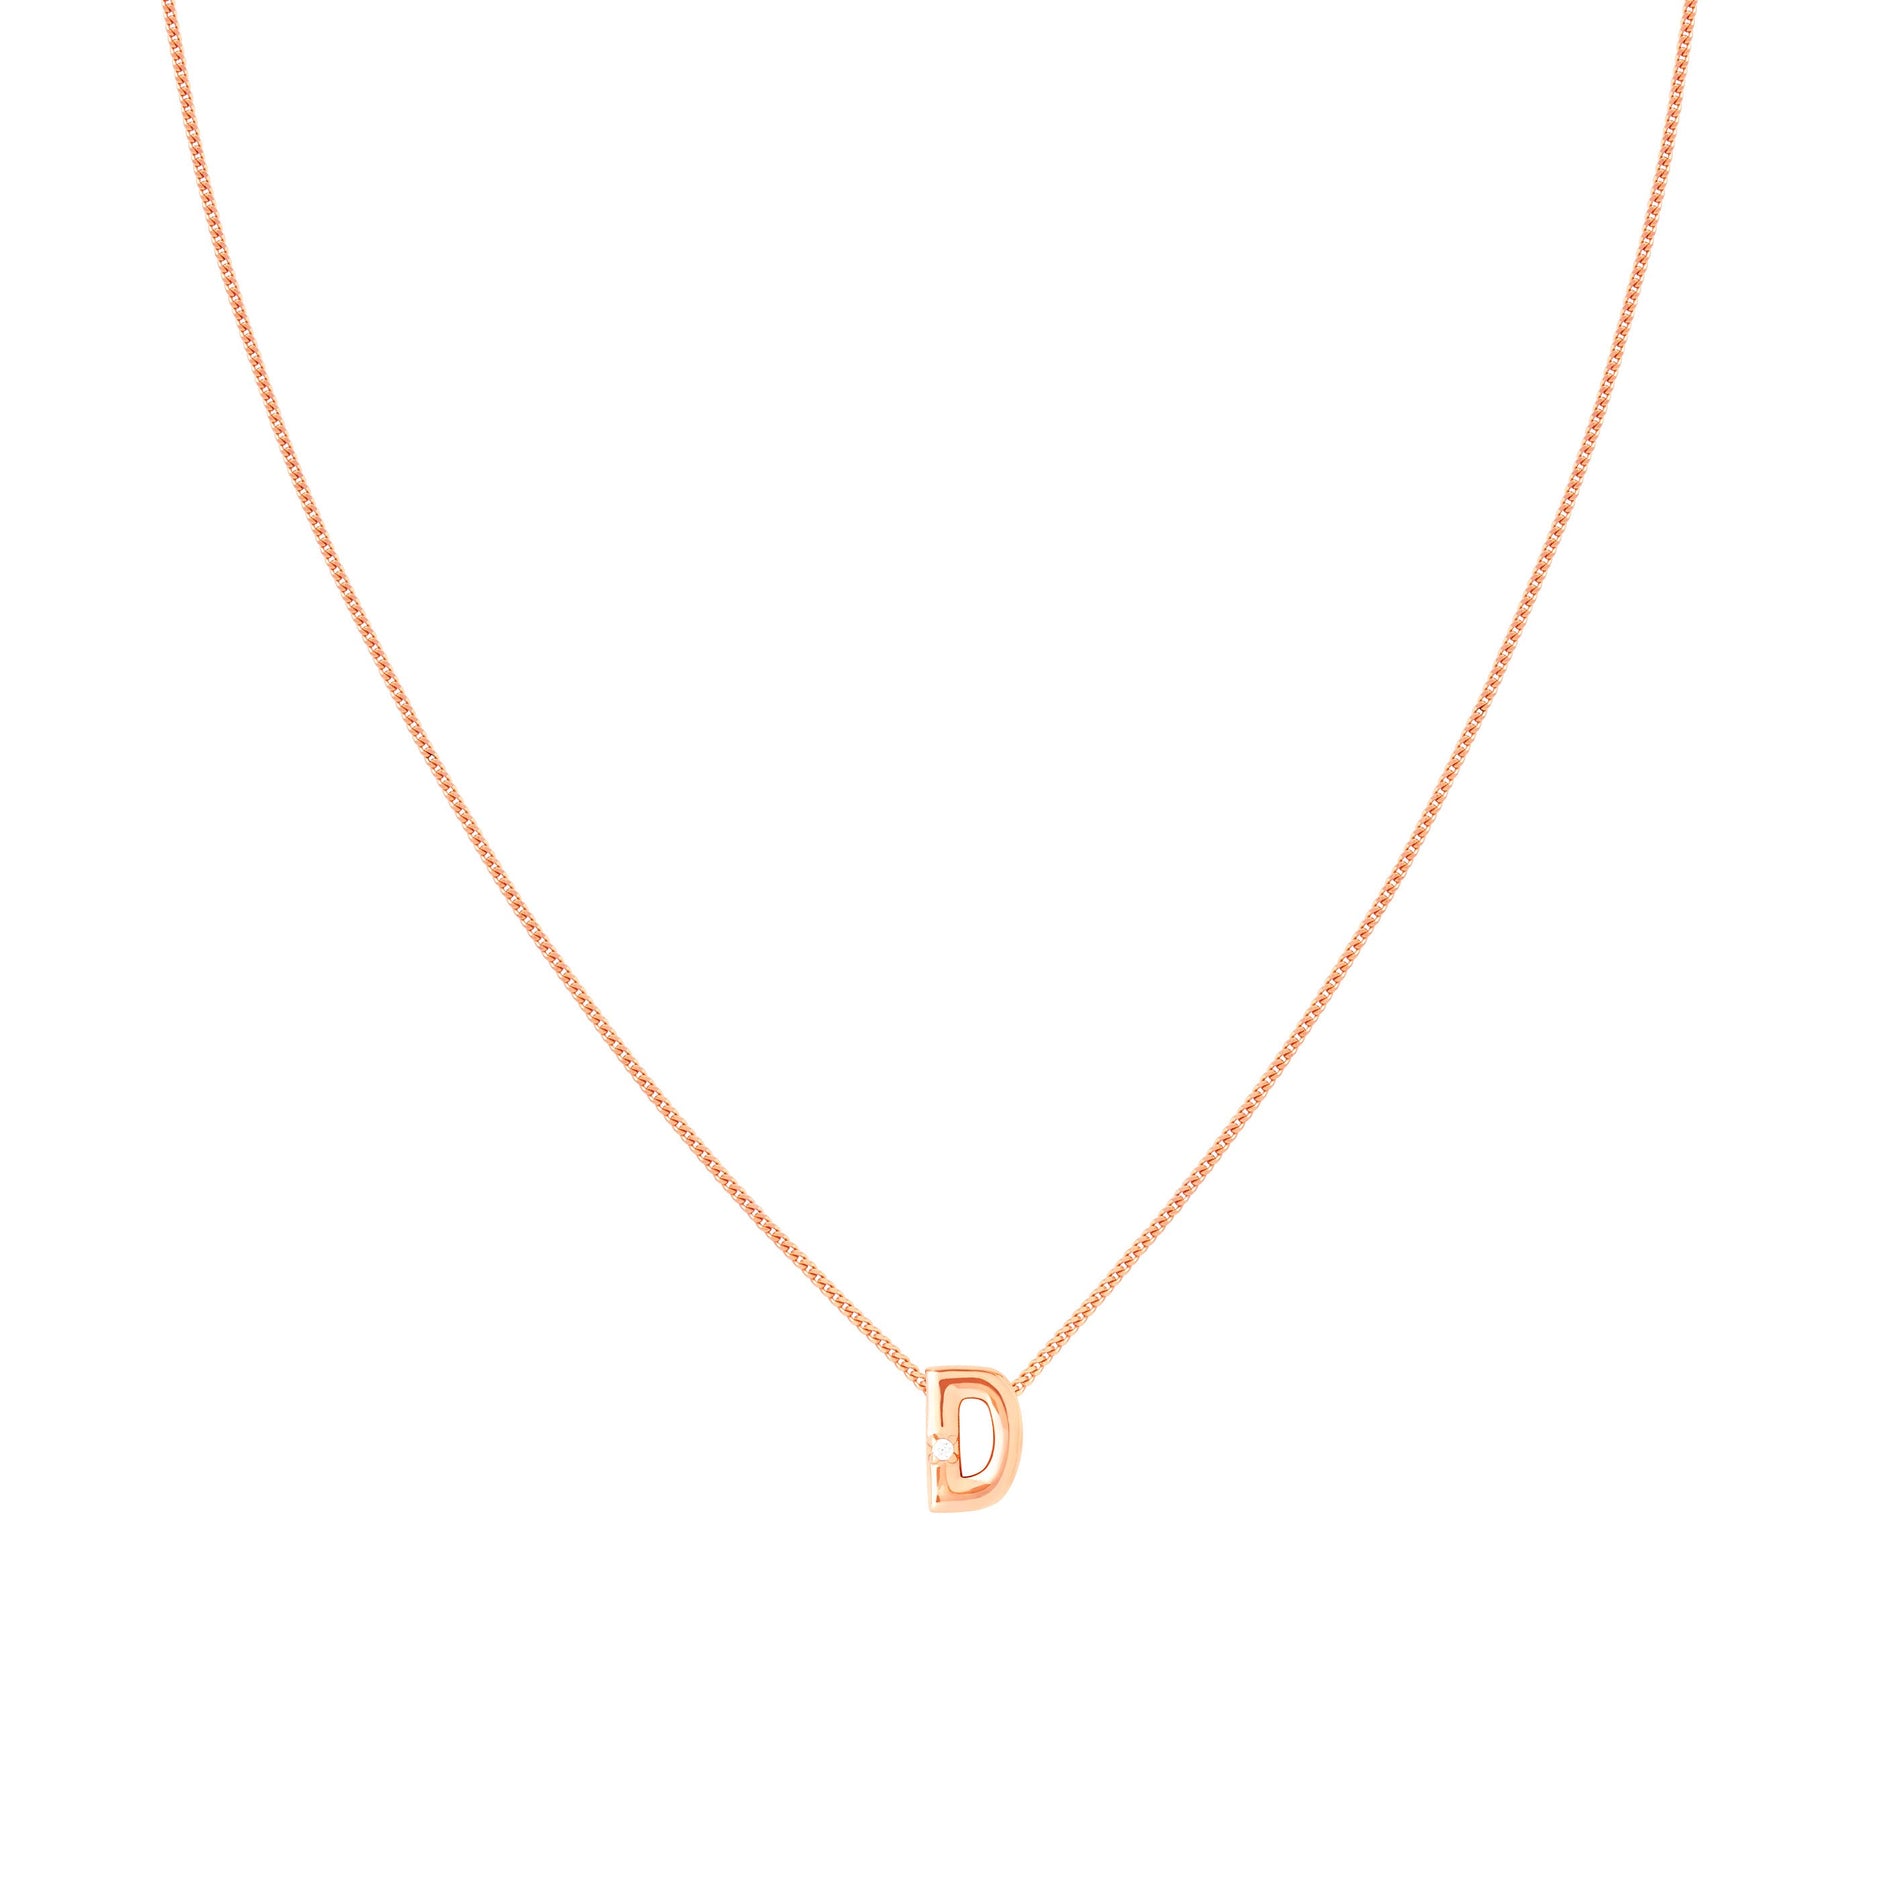 D Initial Pendant Necklace in Rose Gold